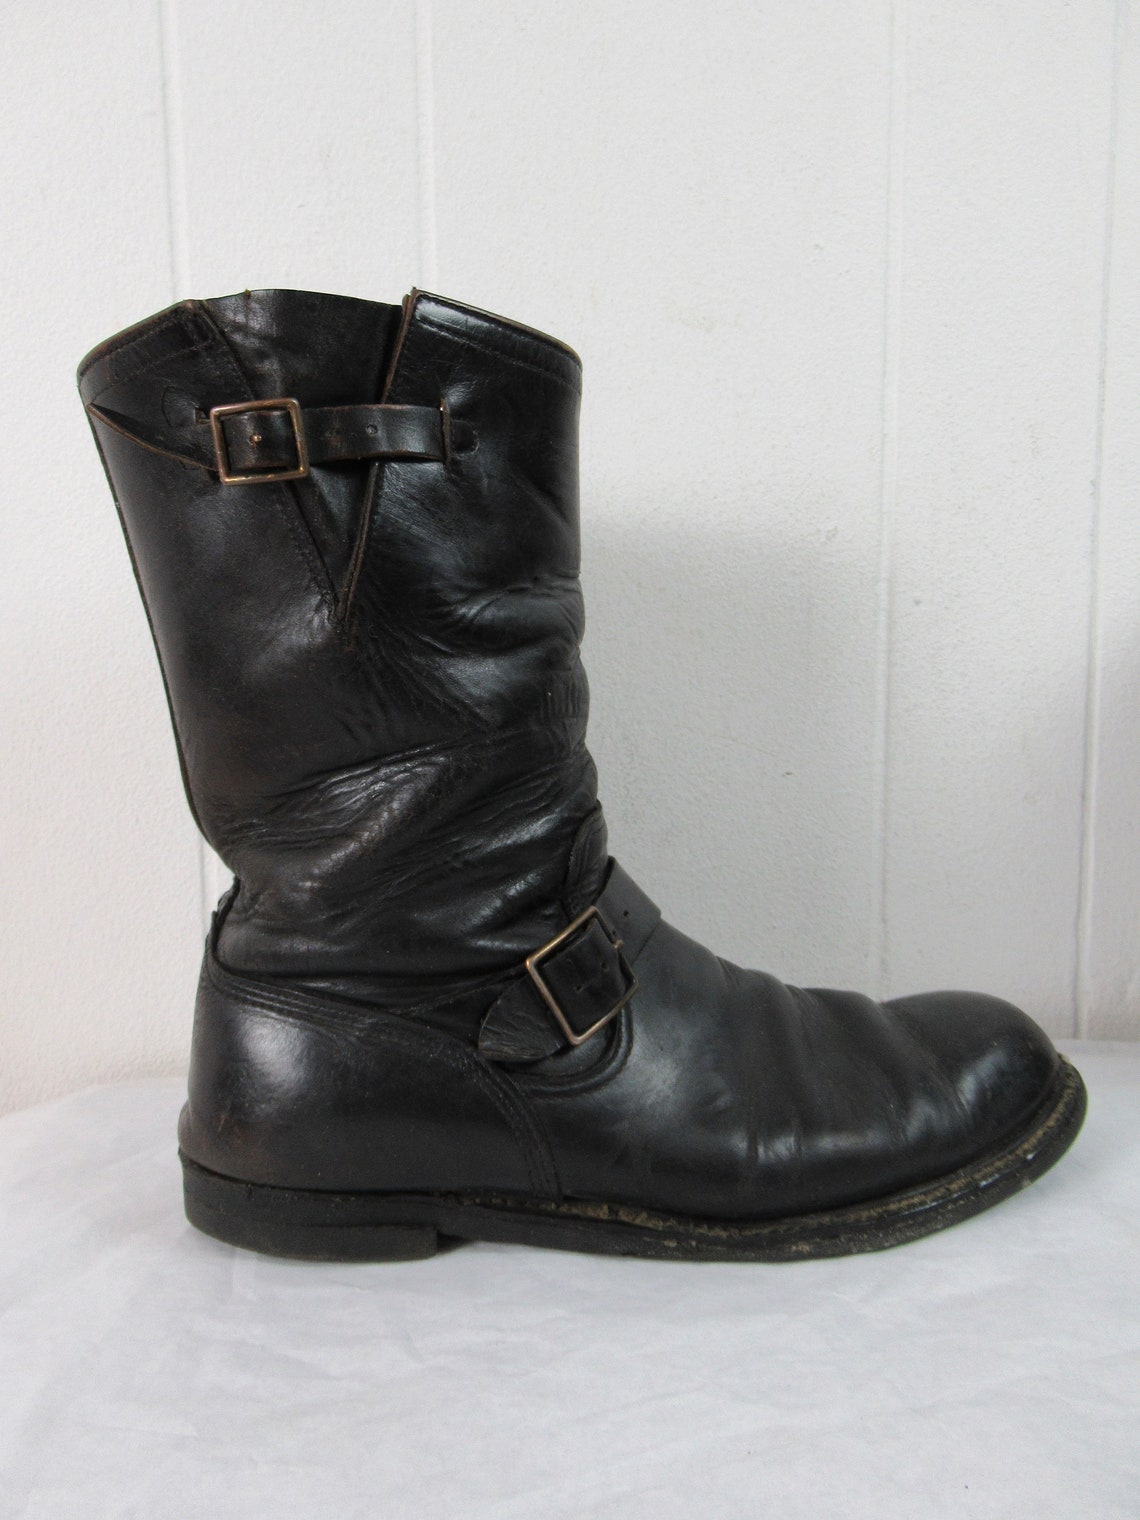 Vintage Boots 1950s Engineer Boots Motorcycle Boots Black - Etsy